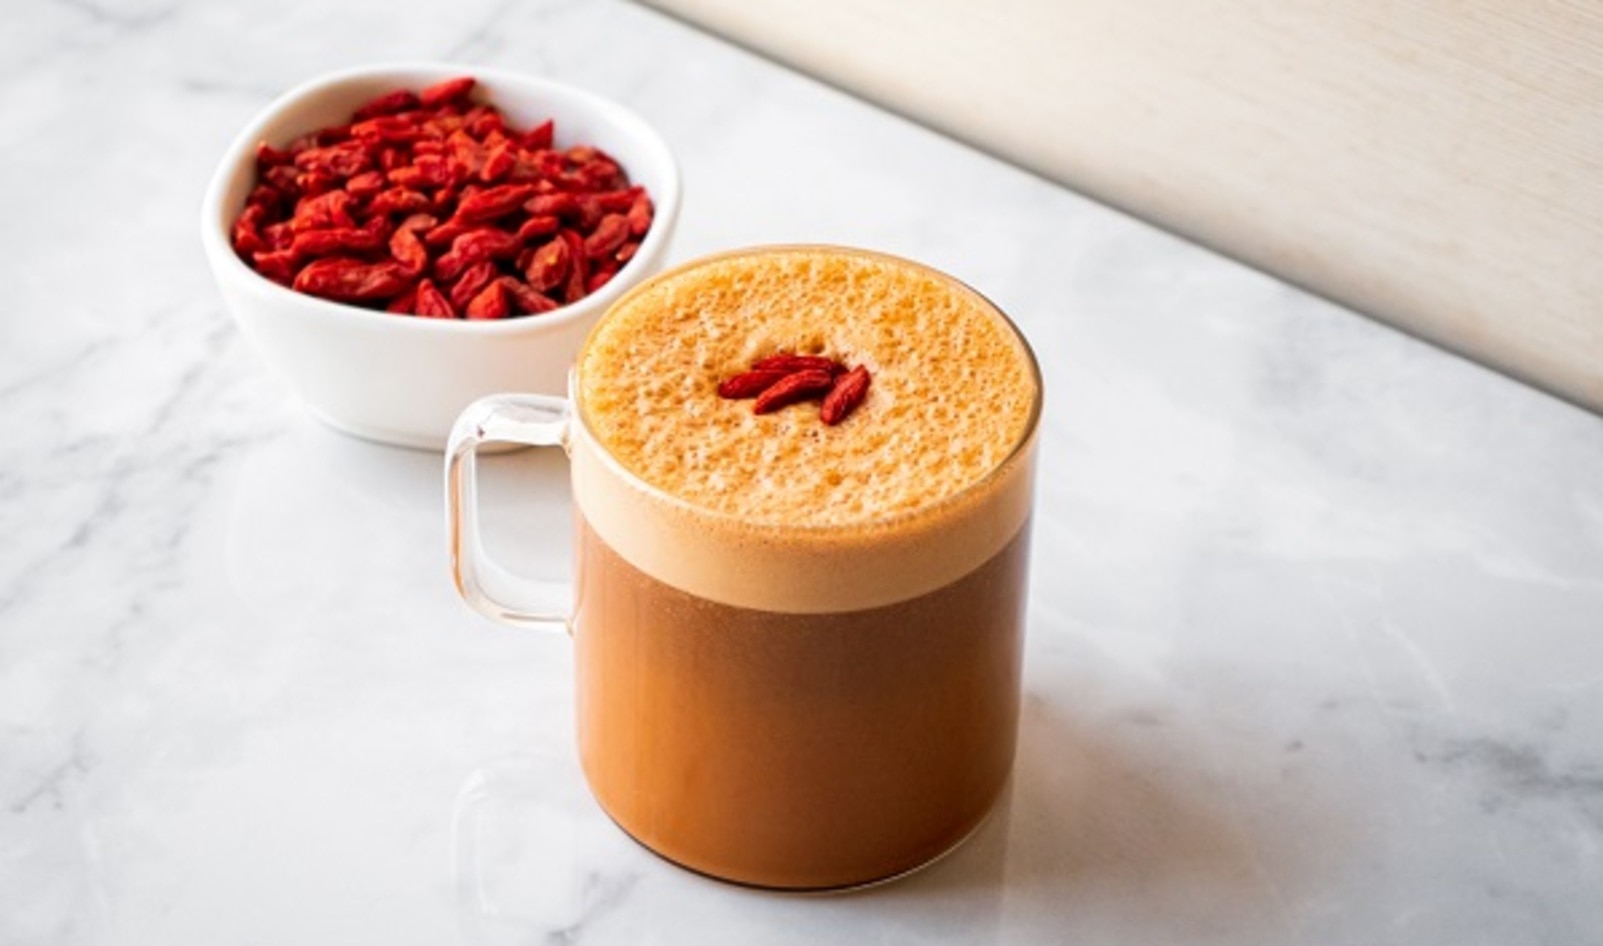 What Is Chinese-Style Coffee? How to Make Lattes With Goji Berries, Star Anise, and More